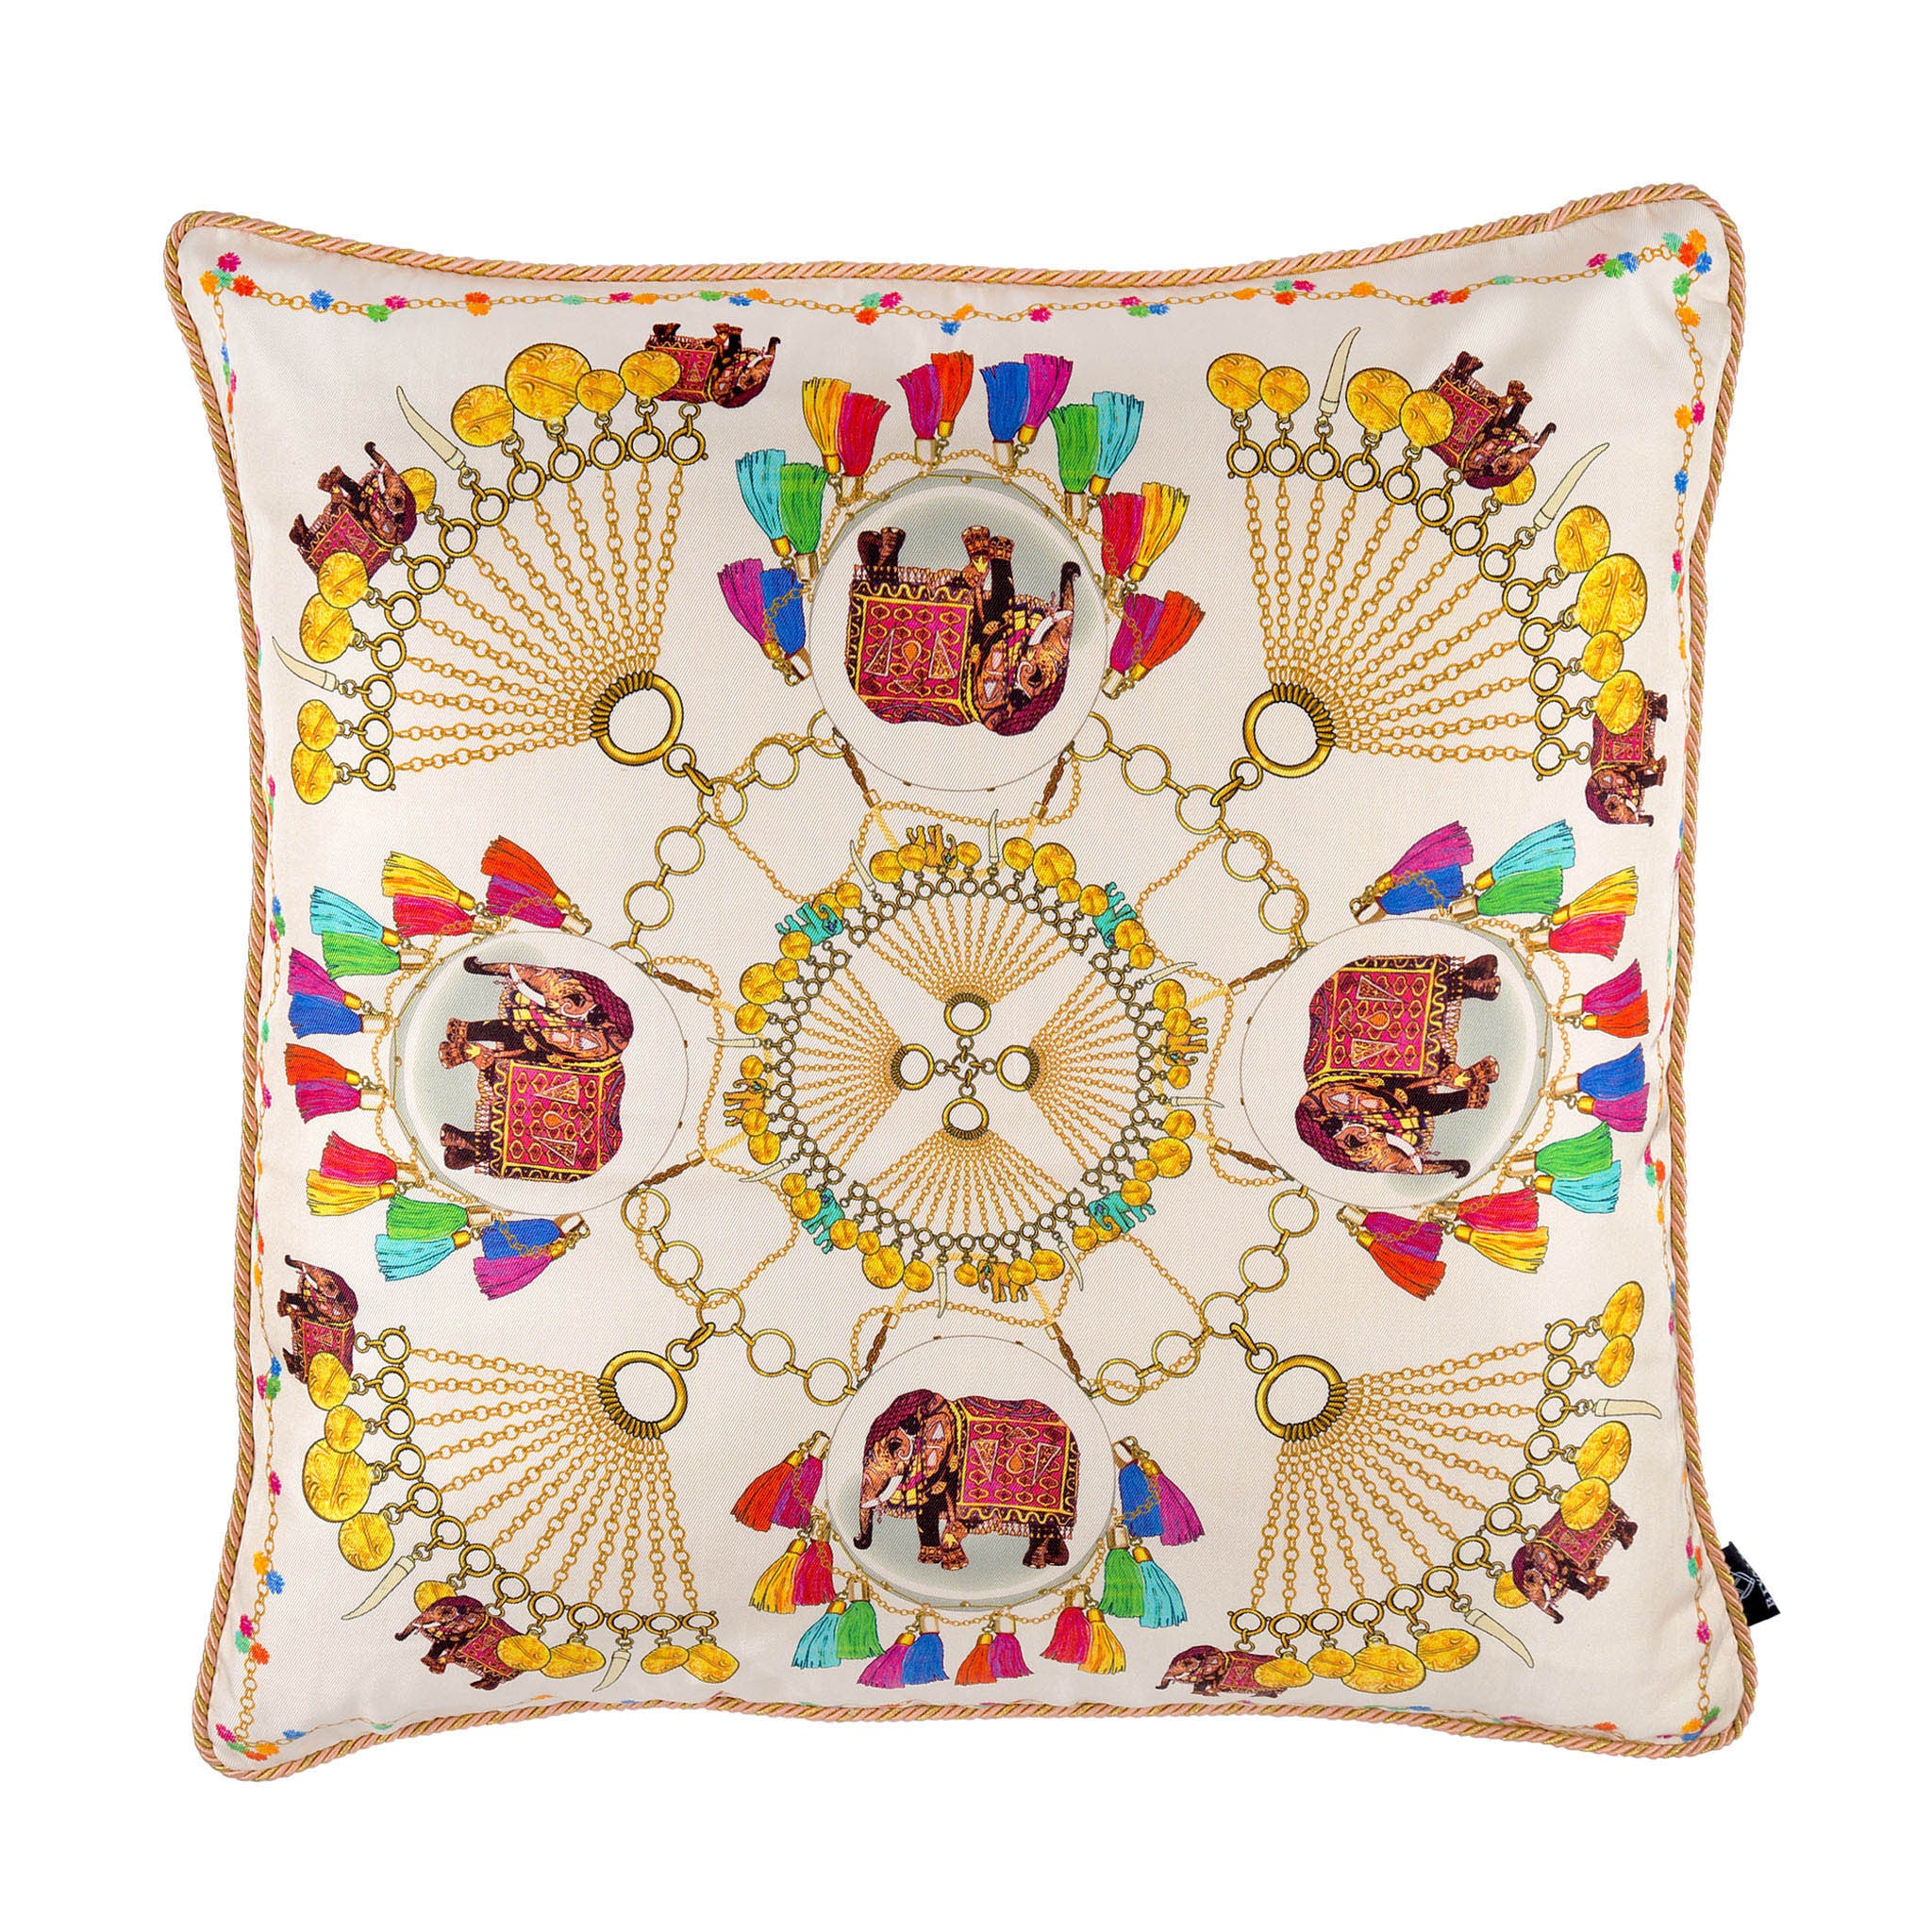 Silk twill and velvet Indian elephant and chain print cushion - Bivain - 1